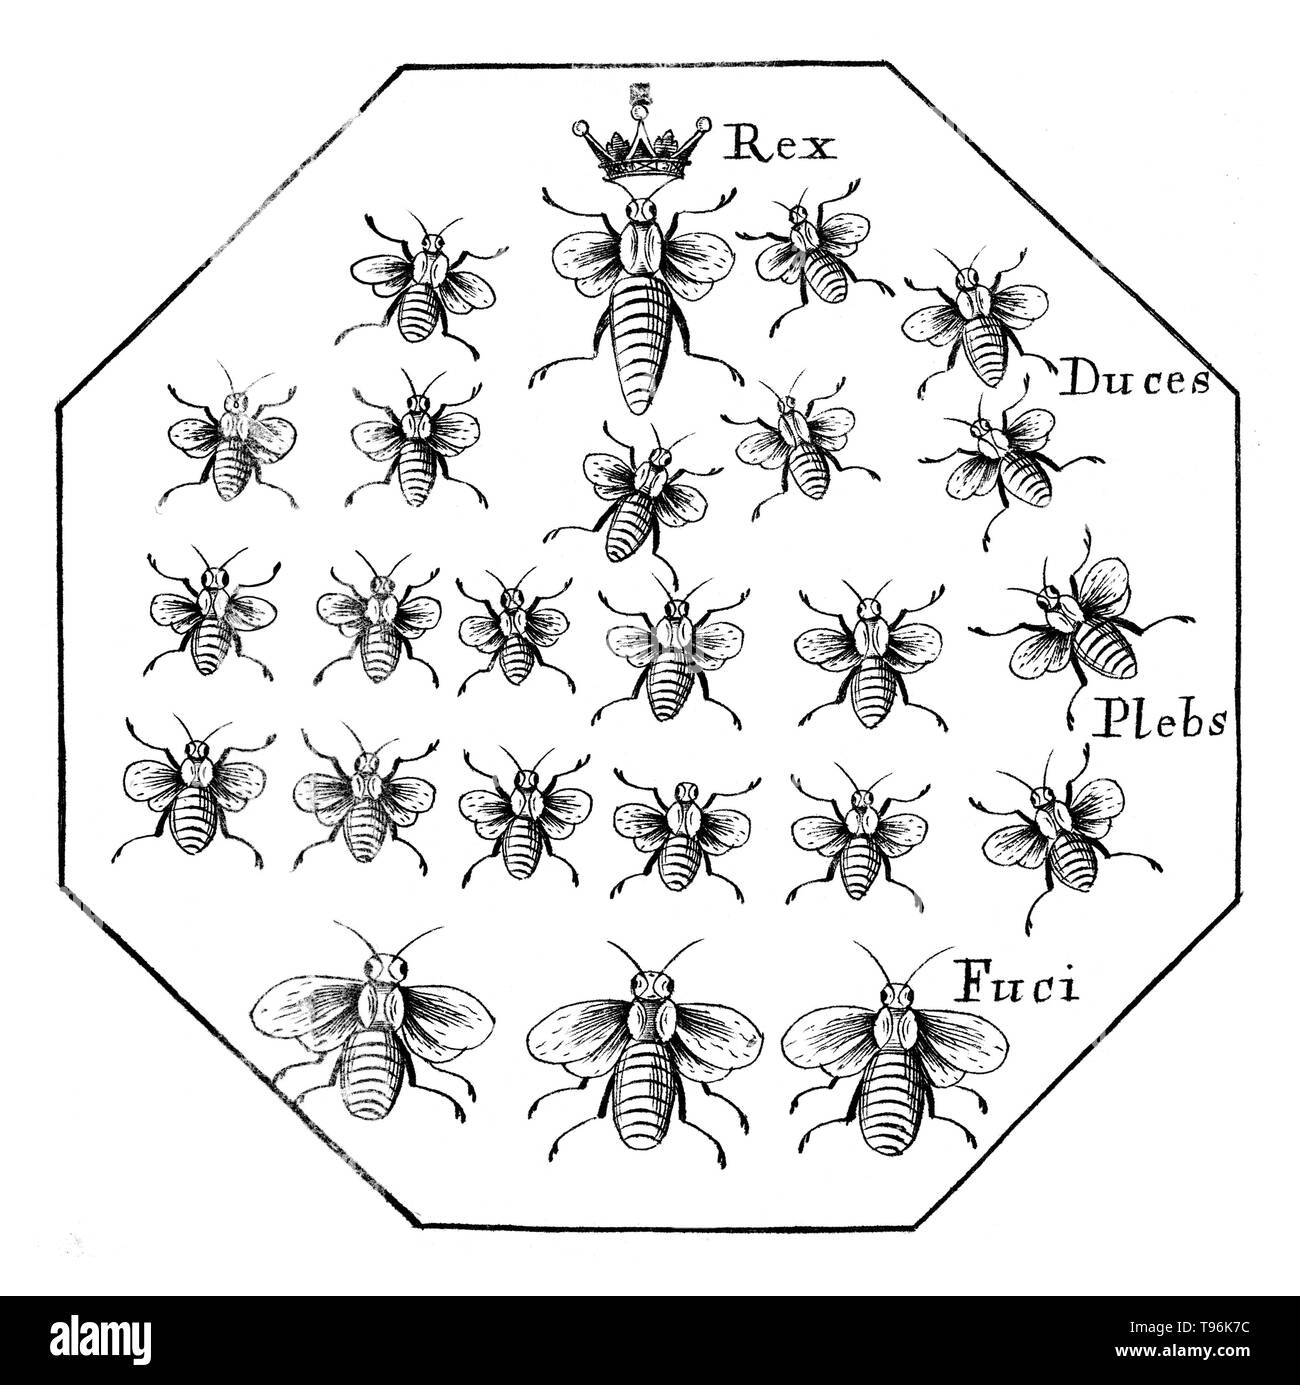 A Further Discovery of Bees: Treating of the nature, government, generation and preservation of the bee. With the experiments and improvements arising from the keeping them in transparent boxes, instead of straw-hives by Moses Rusden, 1679. Latin: Rex (king), in this instance refers to the queen, Duces (leaders), Plebs (people)  refers to workers, Fuci (drones). Stock Photo